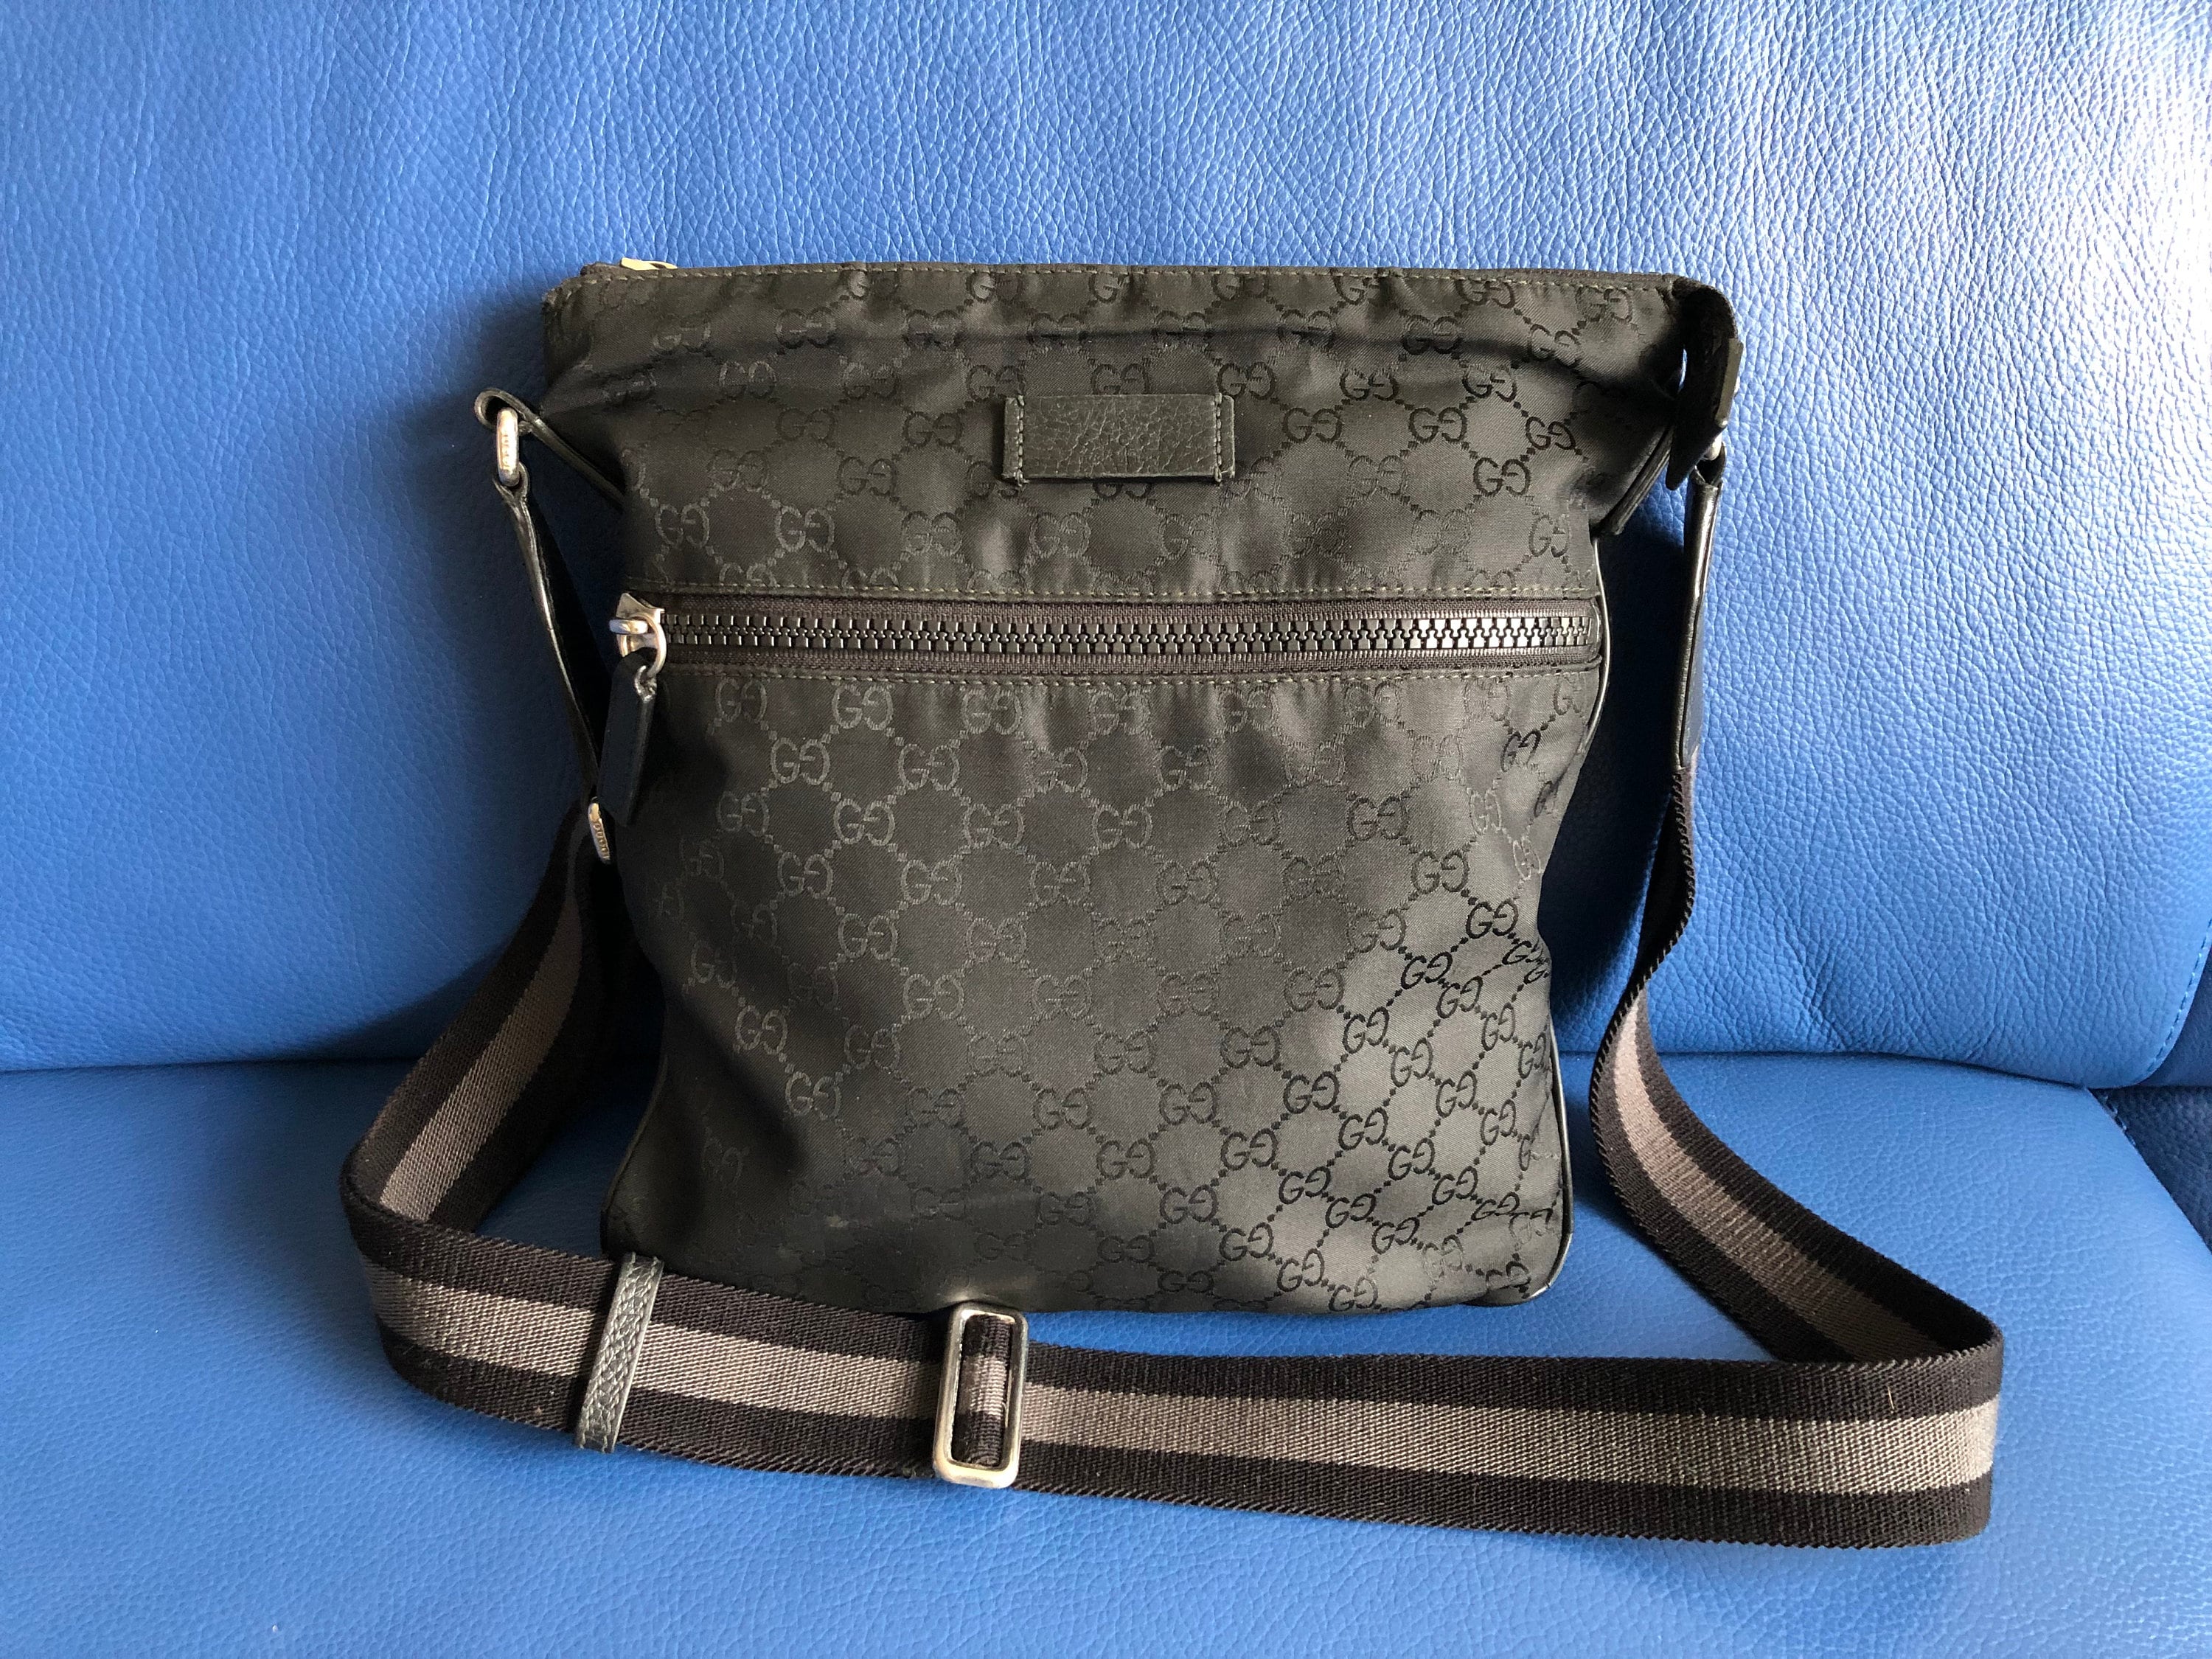 Gucci Messenger Bag Gg Gussissima in Black Canvas and Leather 